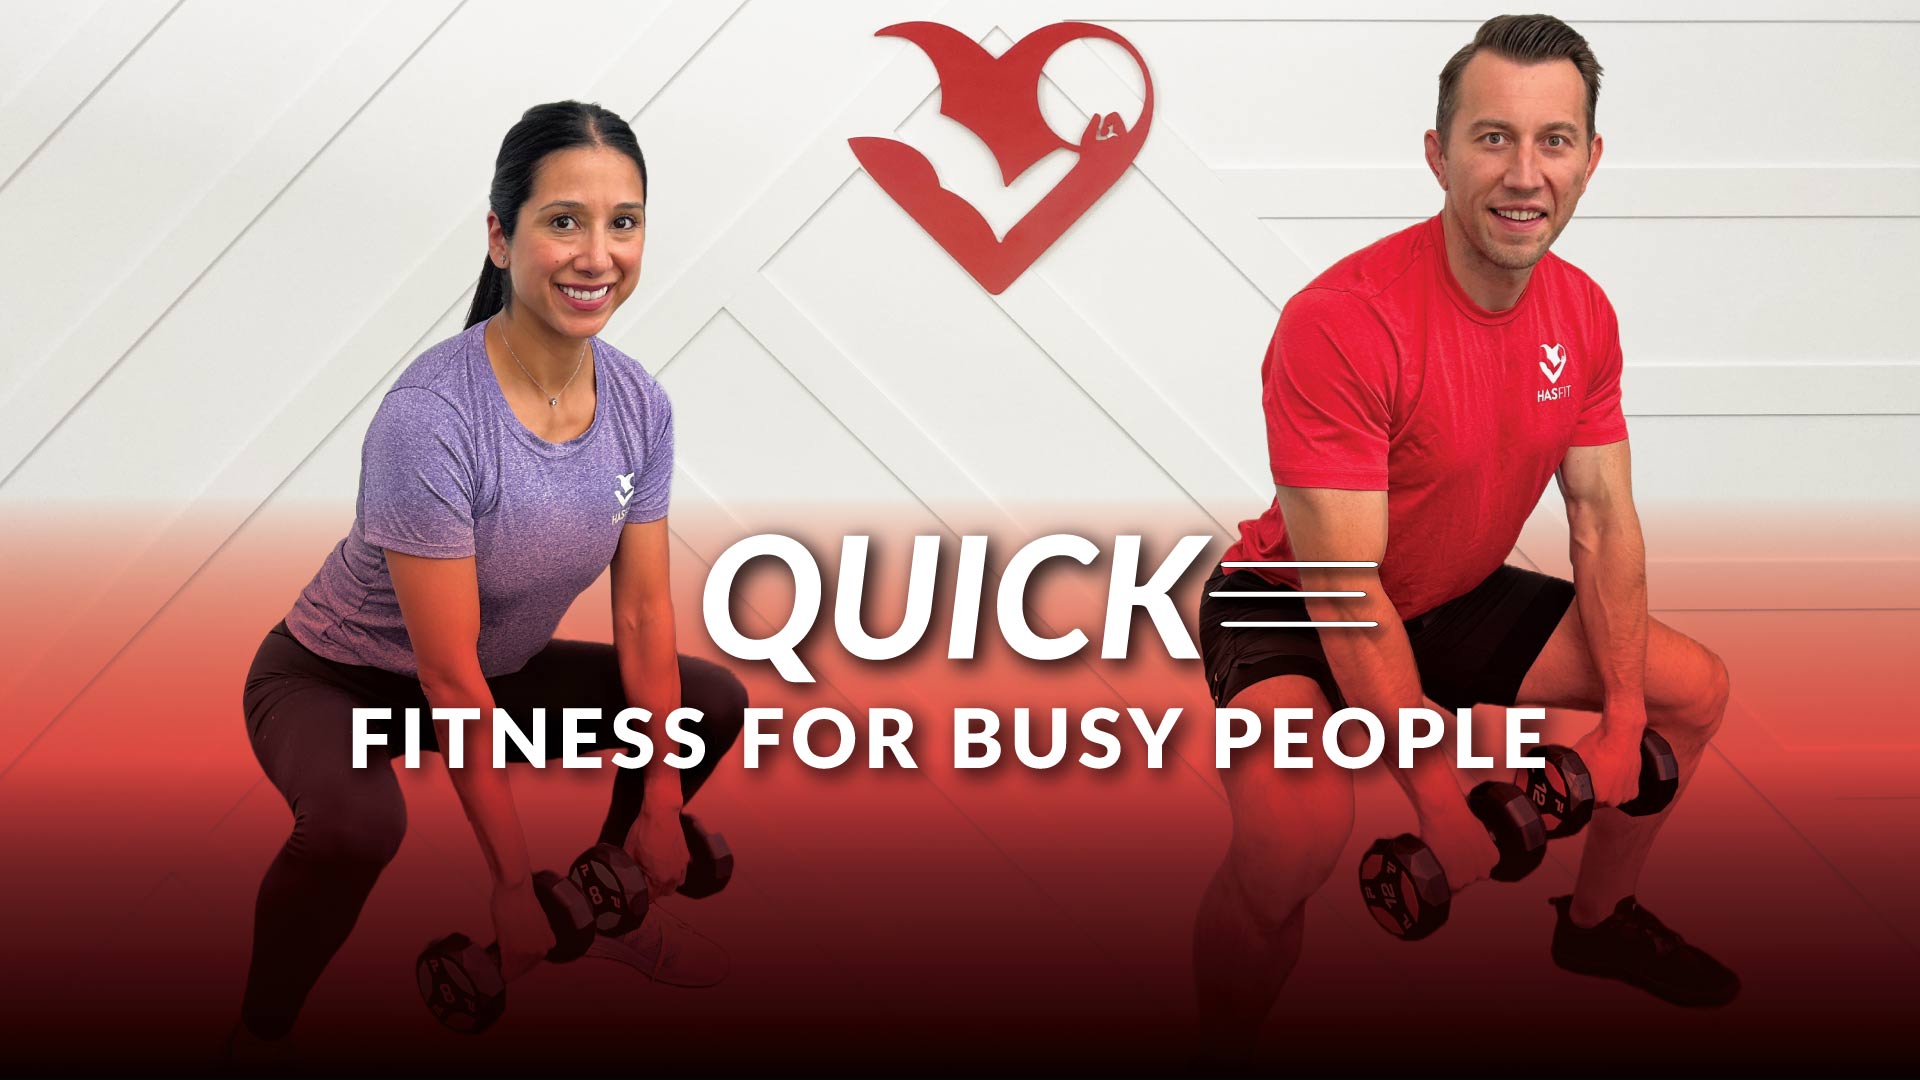 Quick Fitness Program for Busy People